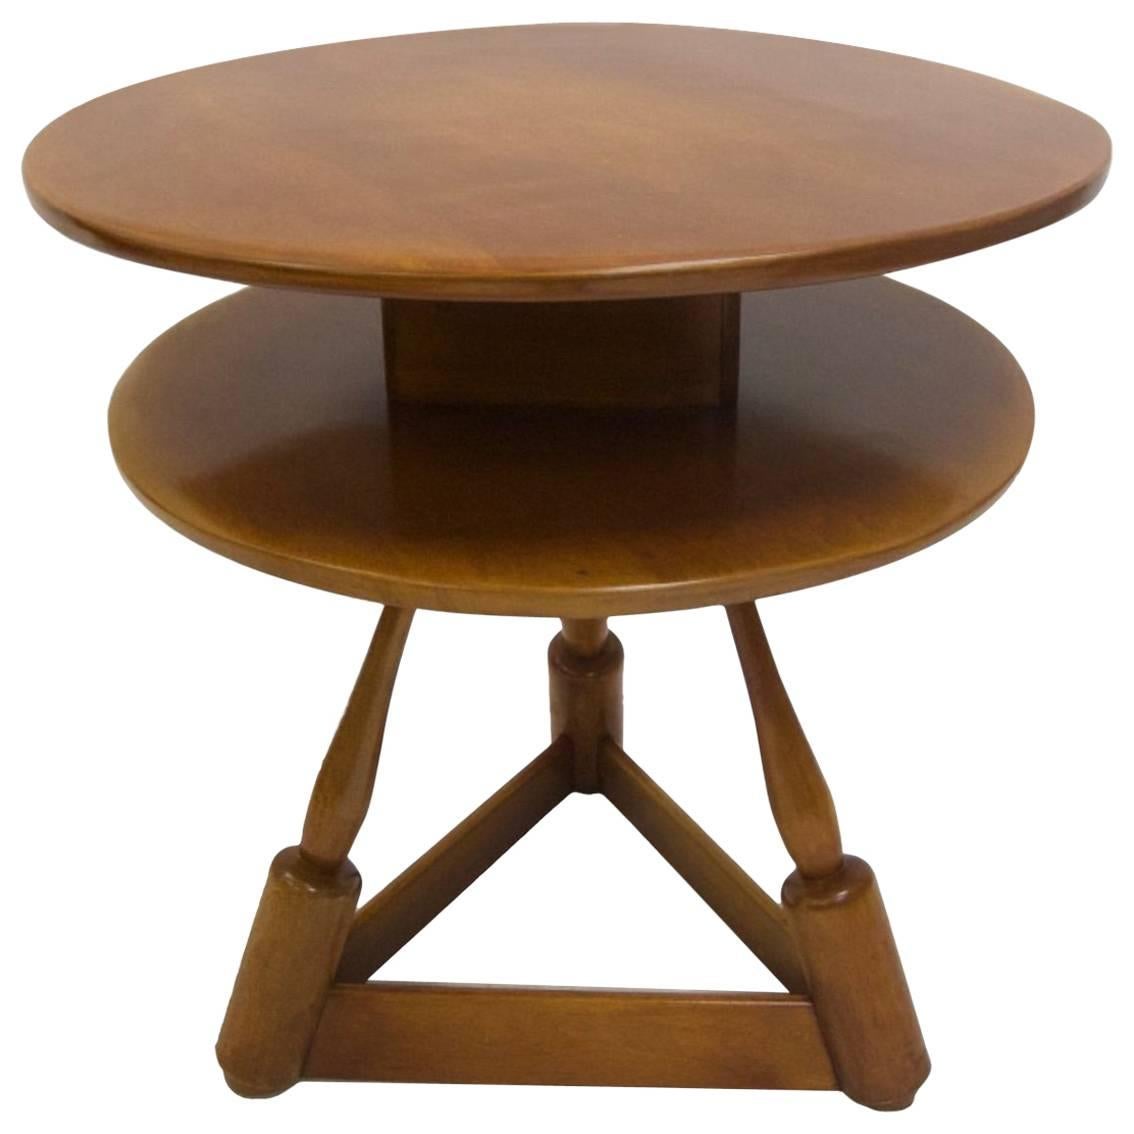 Hard Rock Maple Lamp / Side Table by Herman De Vries for Cushman Furniture